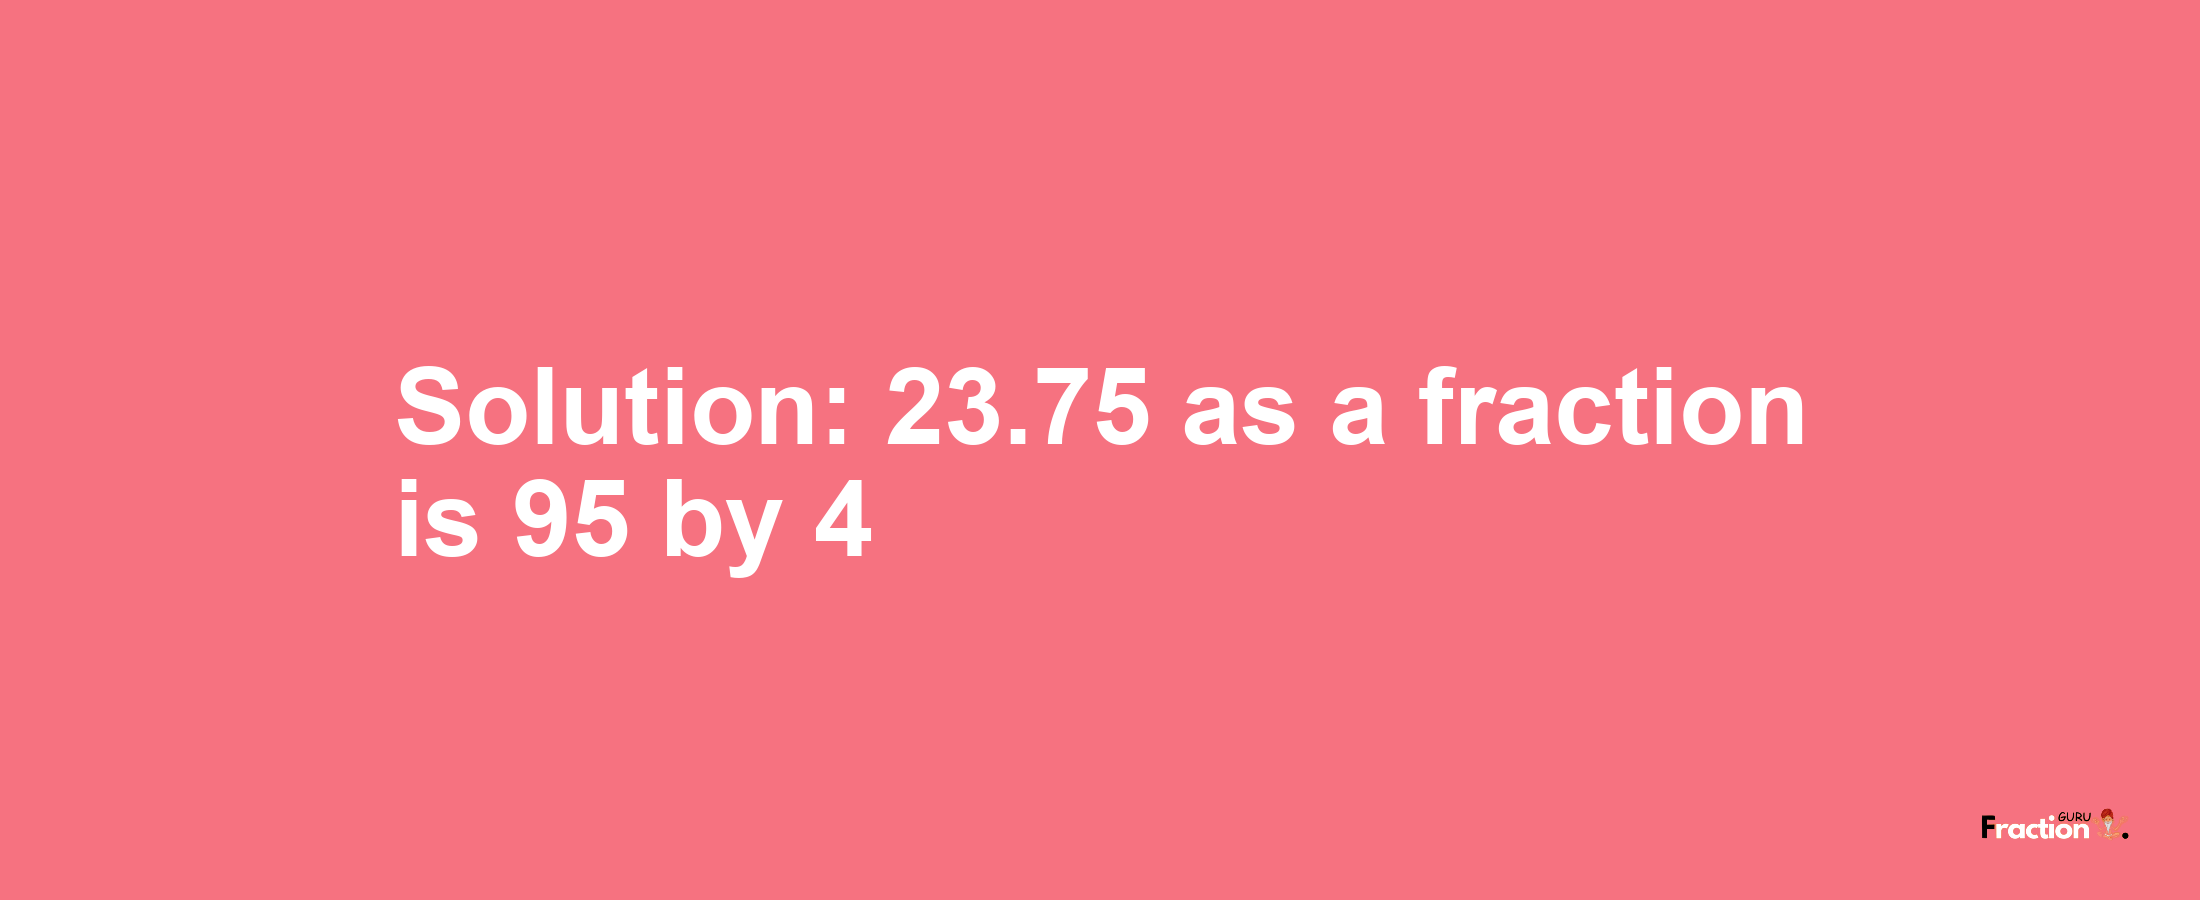 Solution:23.75 as a fraction is 95/4